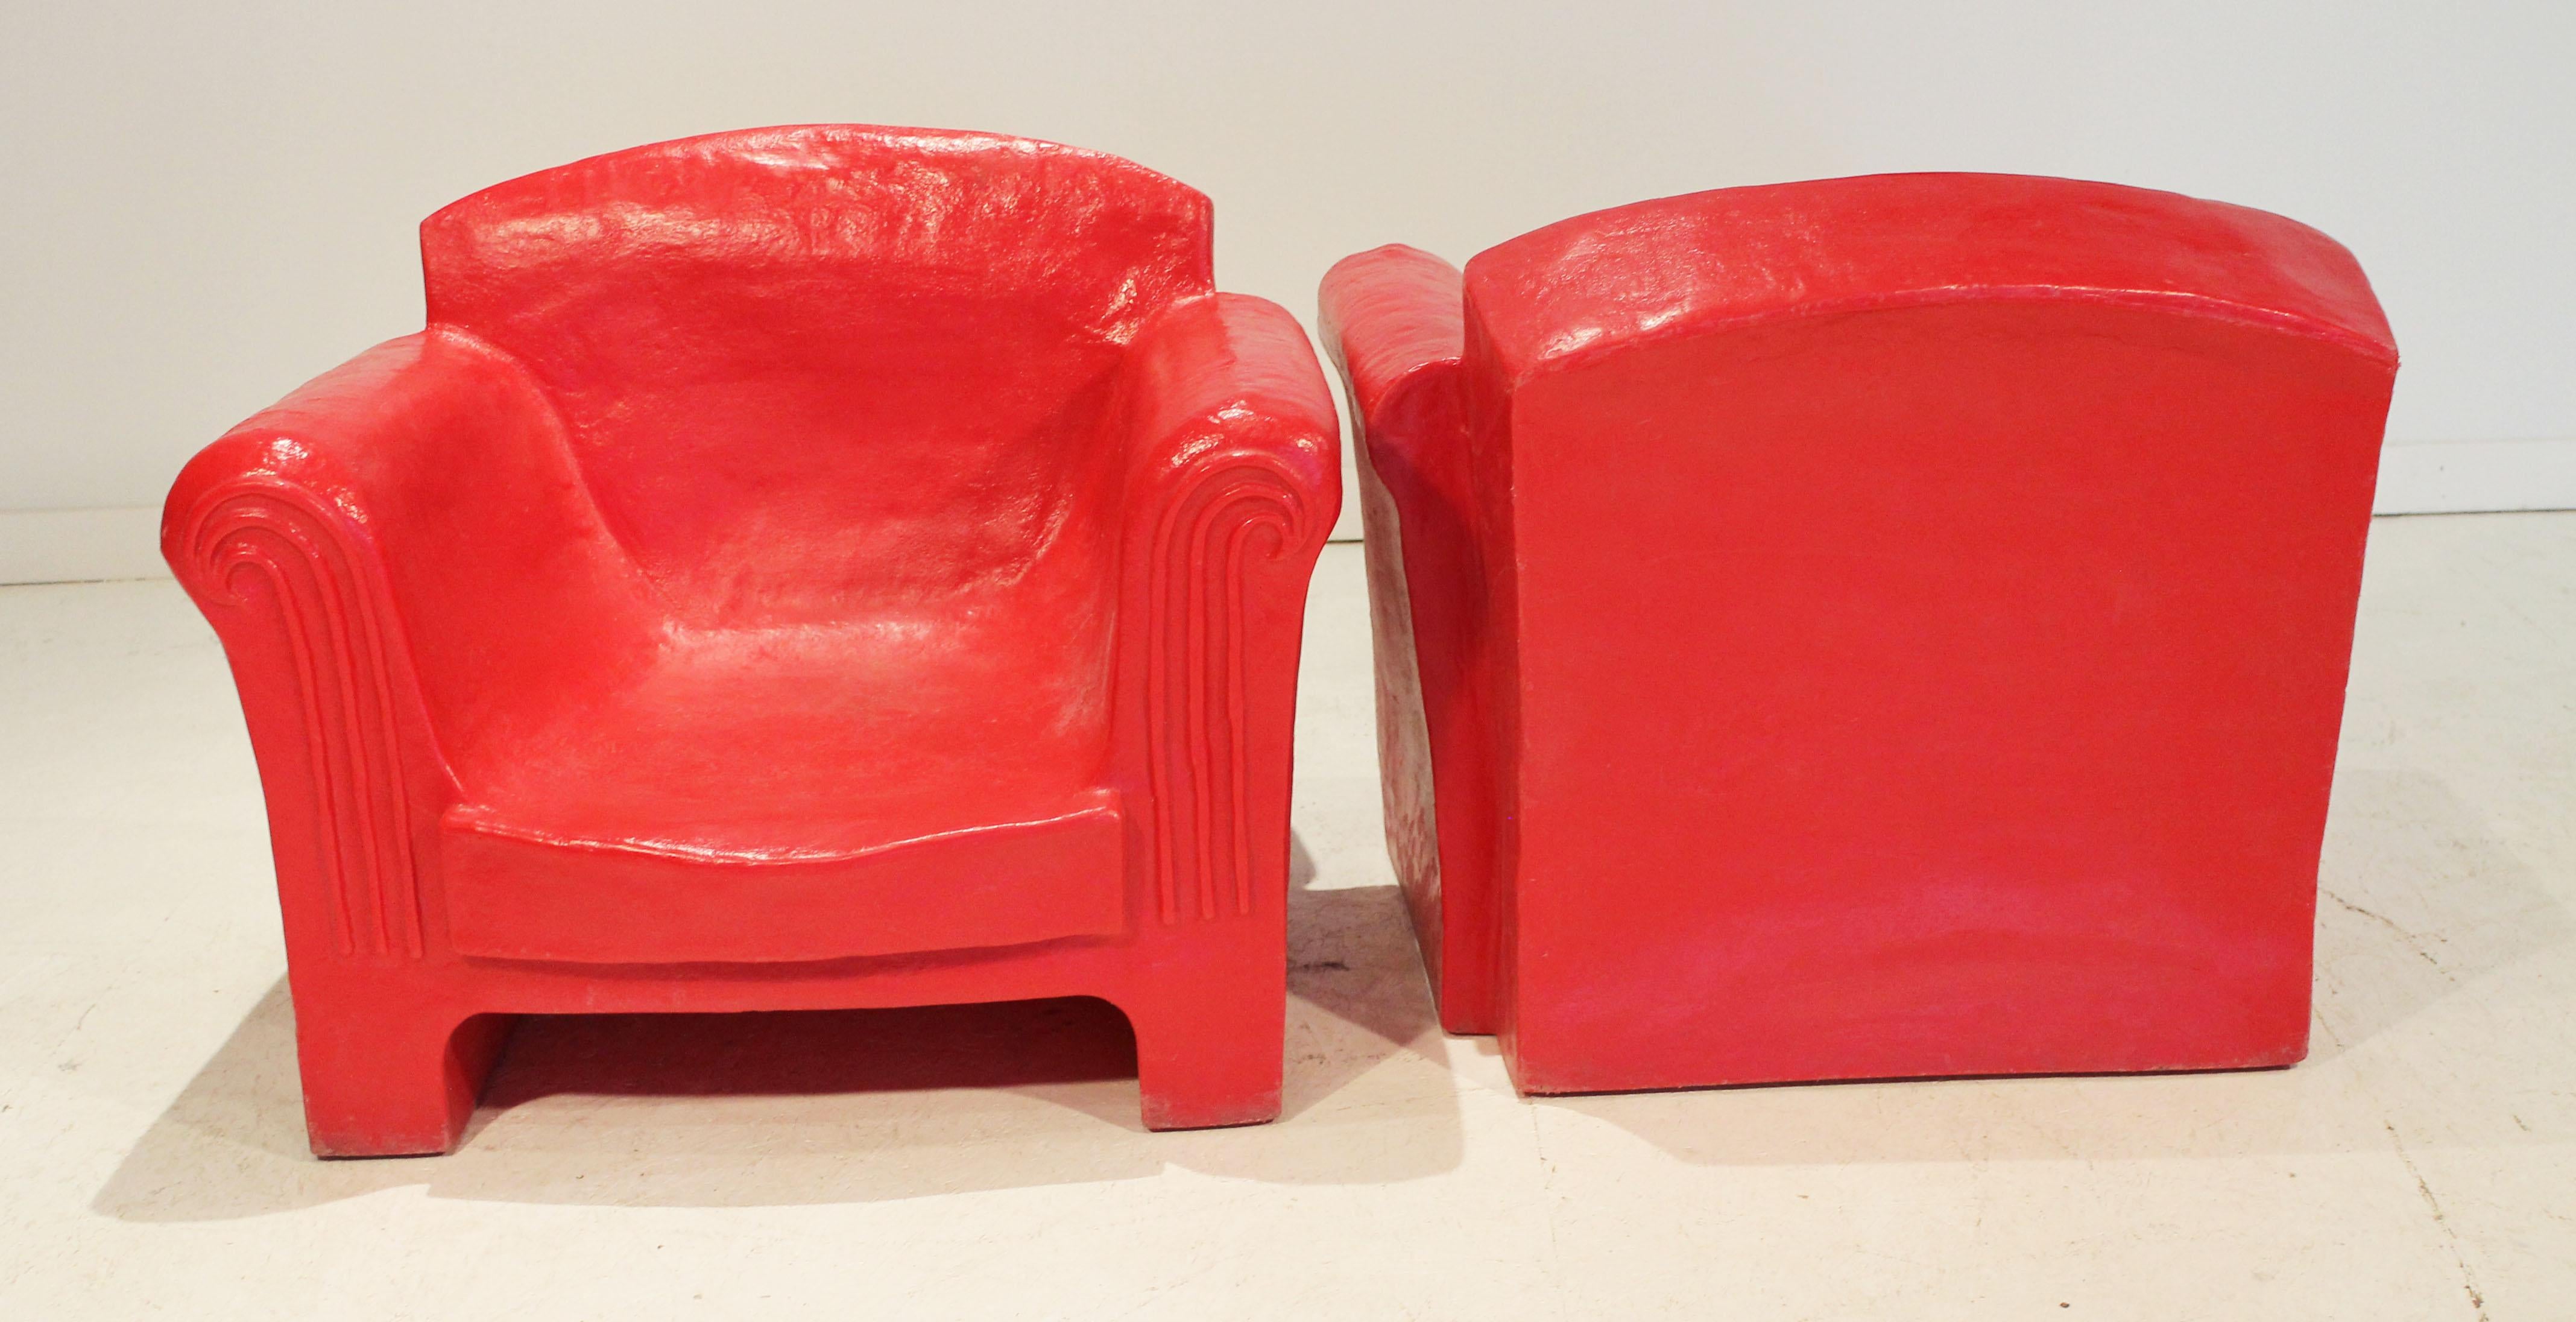 These are an eye catching set of Italian molded plastic chairs. From the Mid-Century Modern era, these chairs will add a pop of color in any environment. Given their plastic construction, these could be used indoors or outdoors on a patio or by a